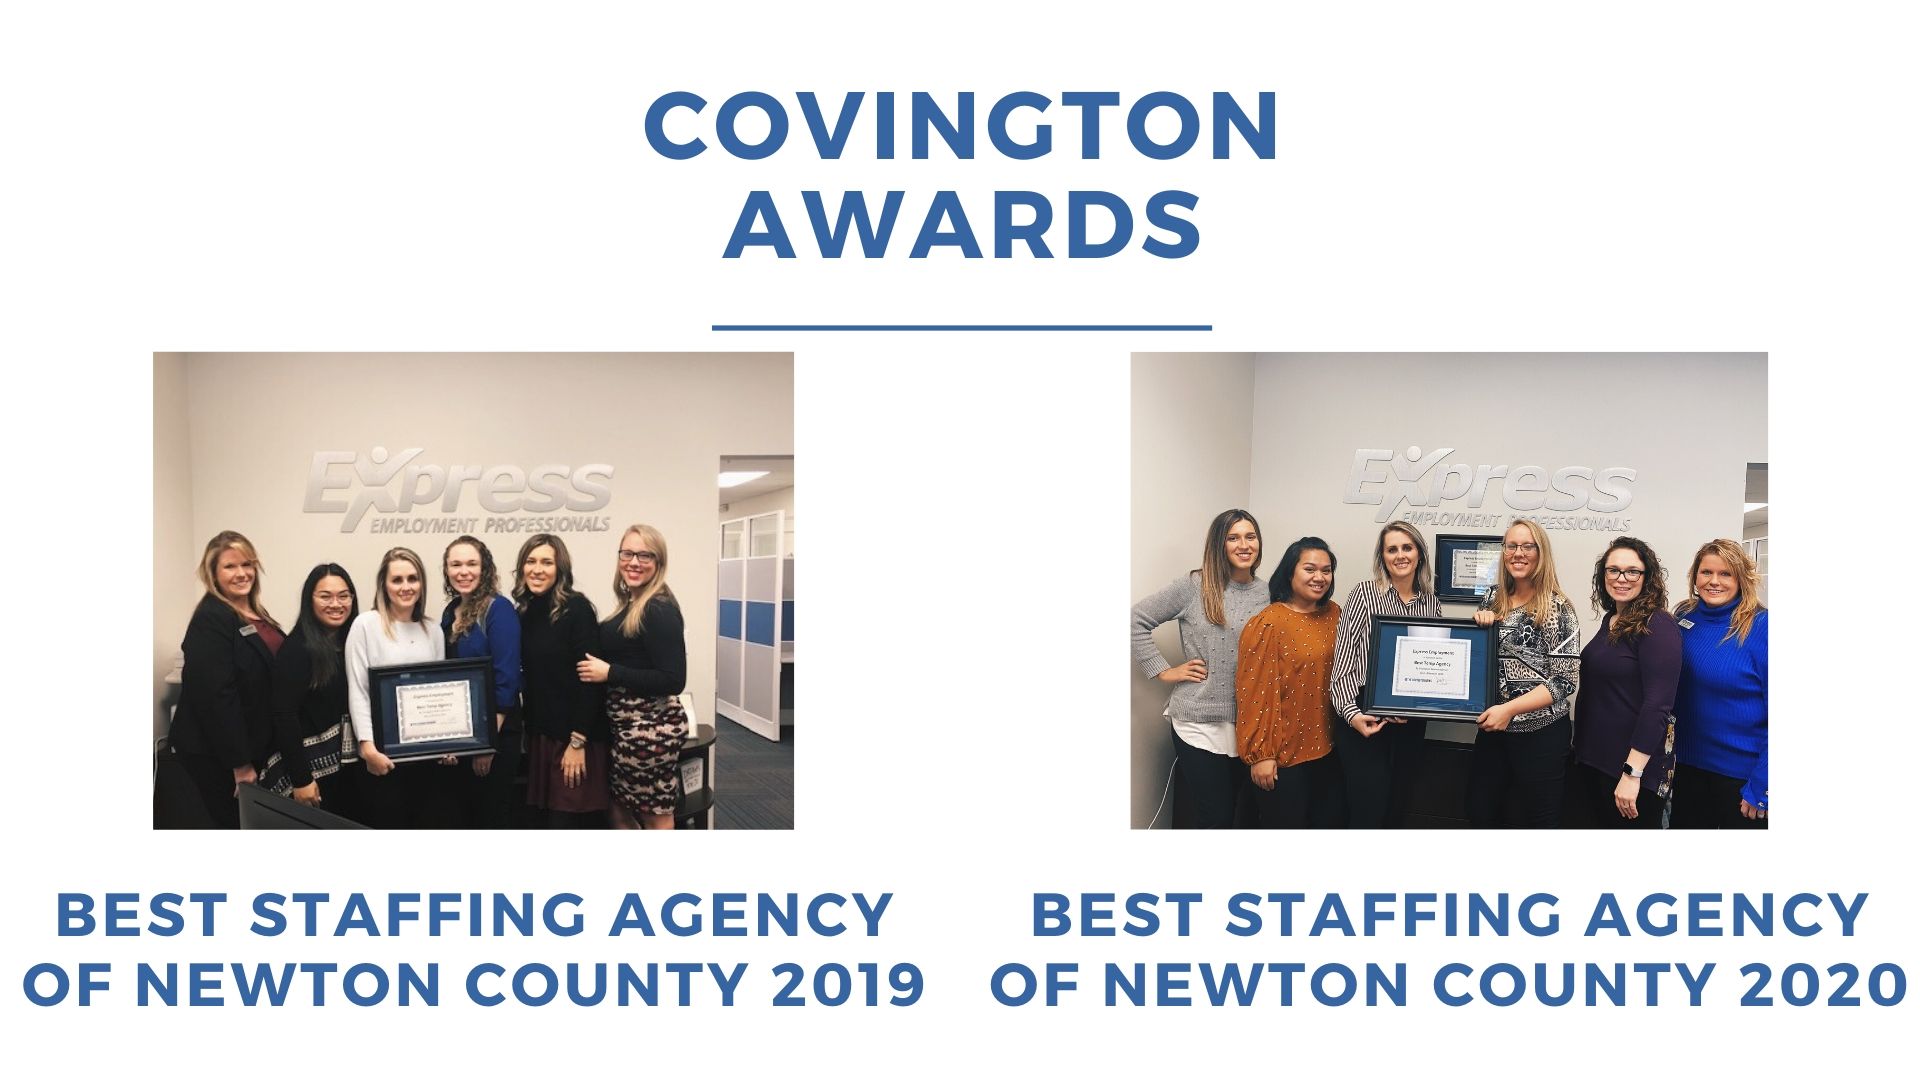 Best Staffing Agency of Newton